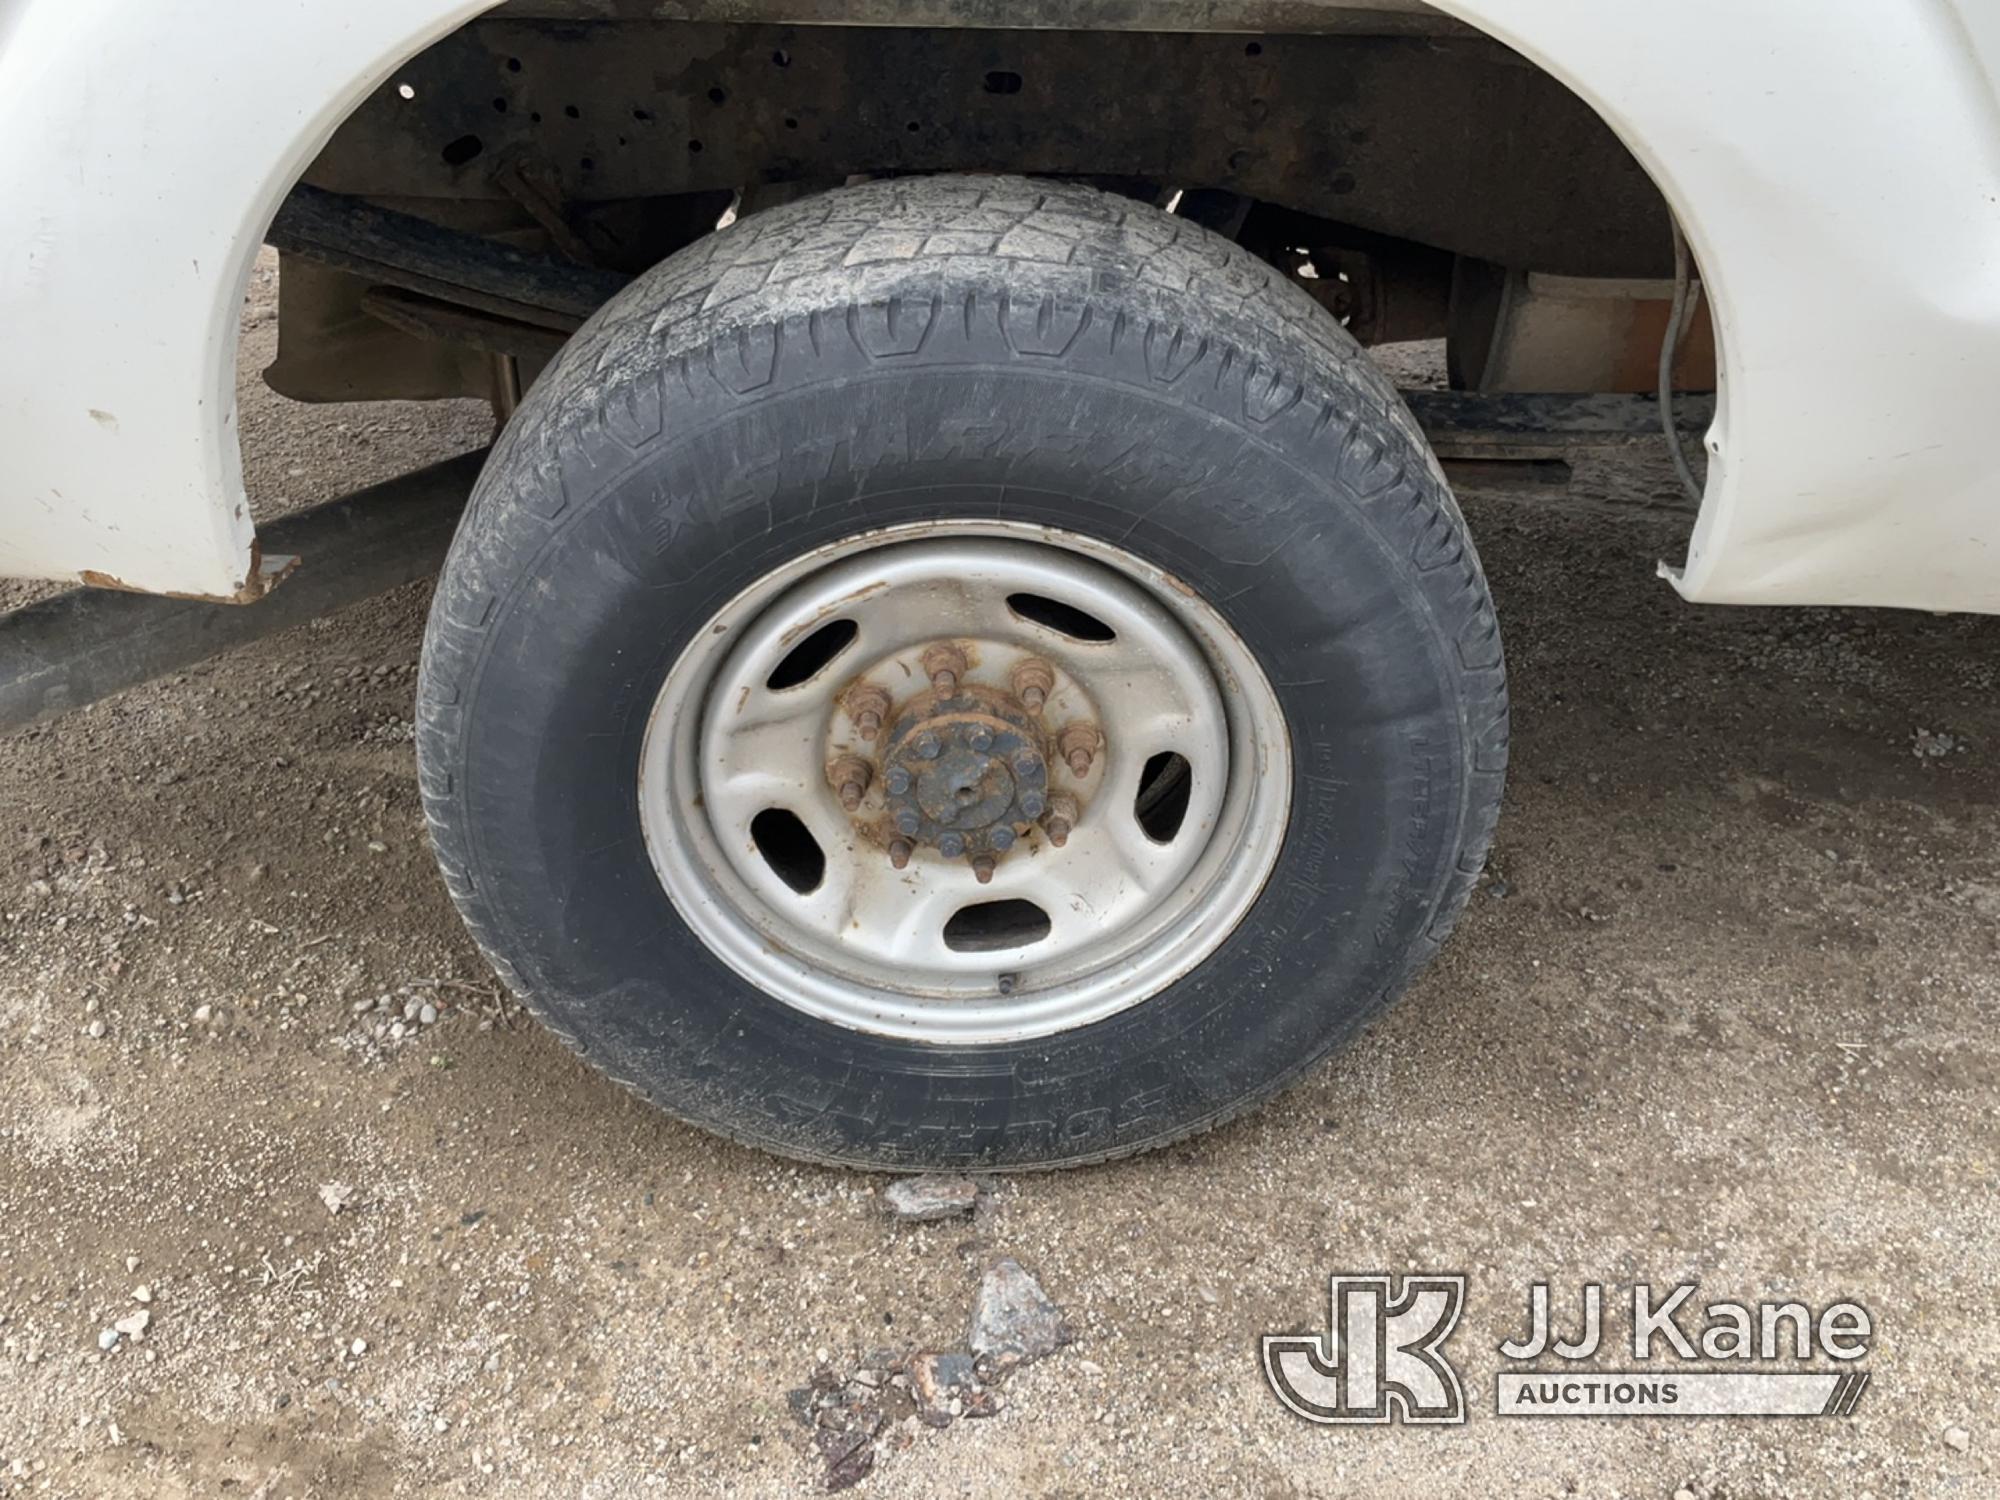 (Charlotte, MI) 2016 Ford F250 4x4 Crew-Cab Pickup Truck Cranks With Jump, Condition Unknown, Rust,